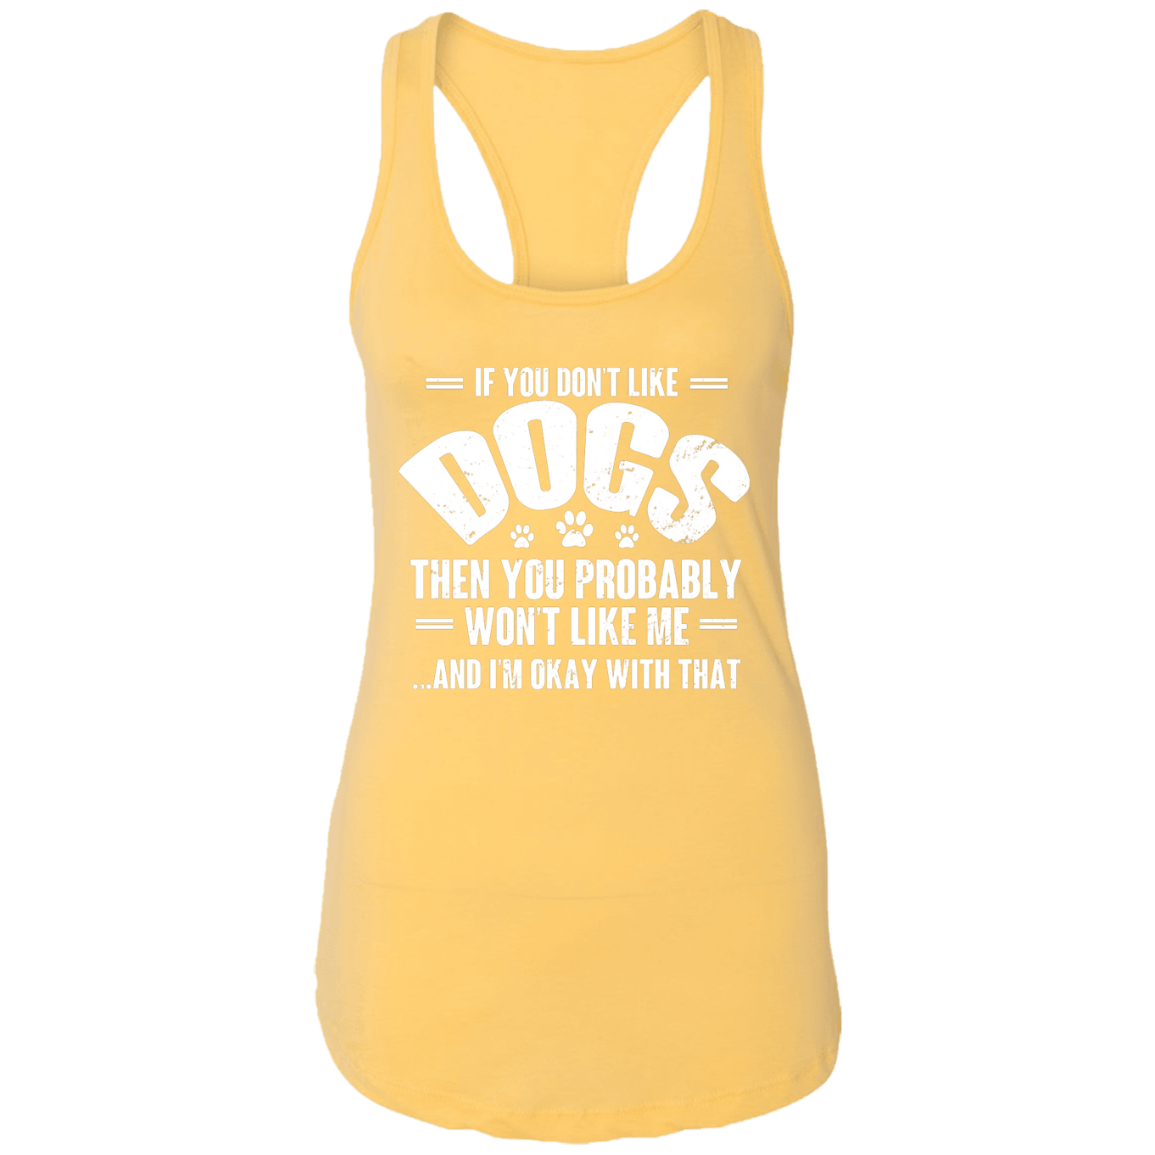 If You Don't Like Dogs - Ladies Racer Back Tank.